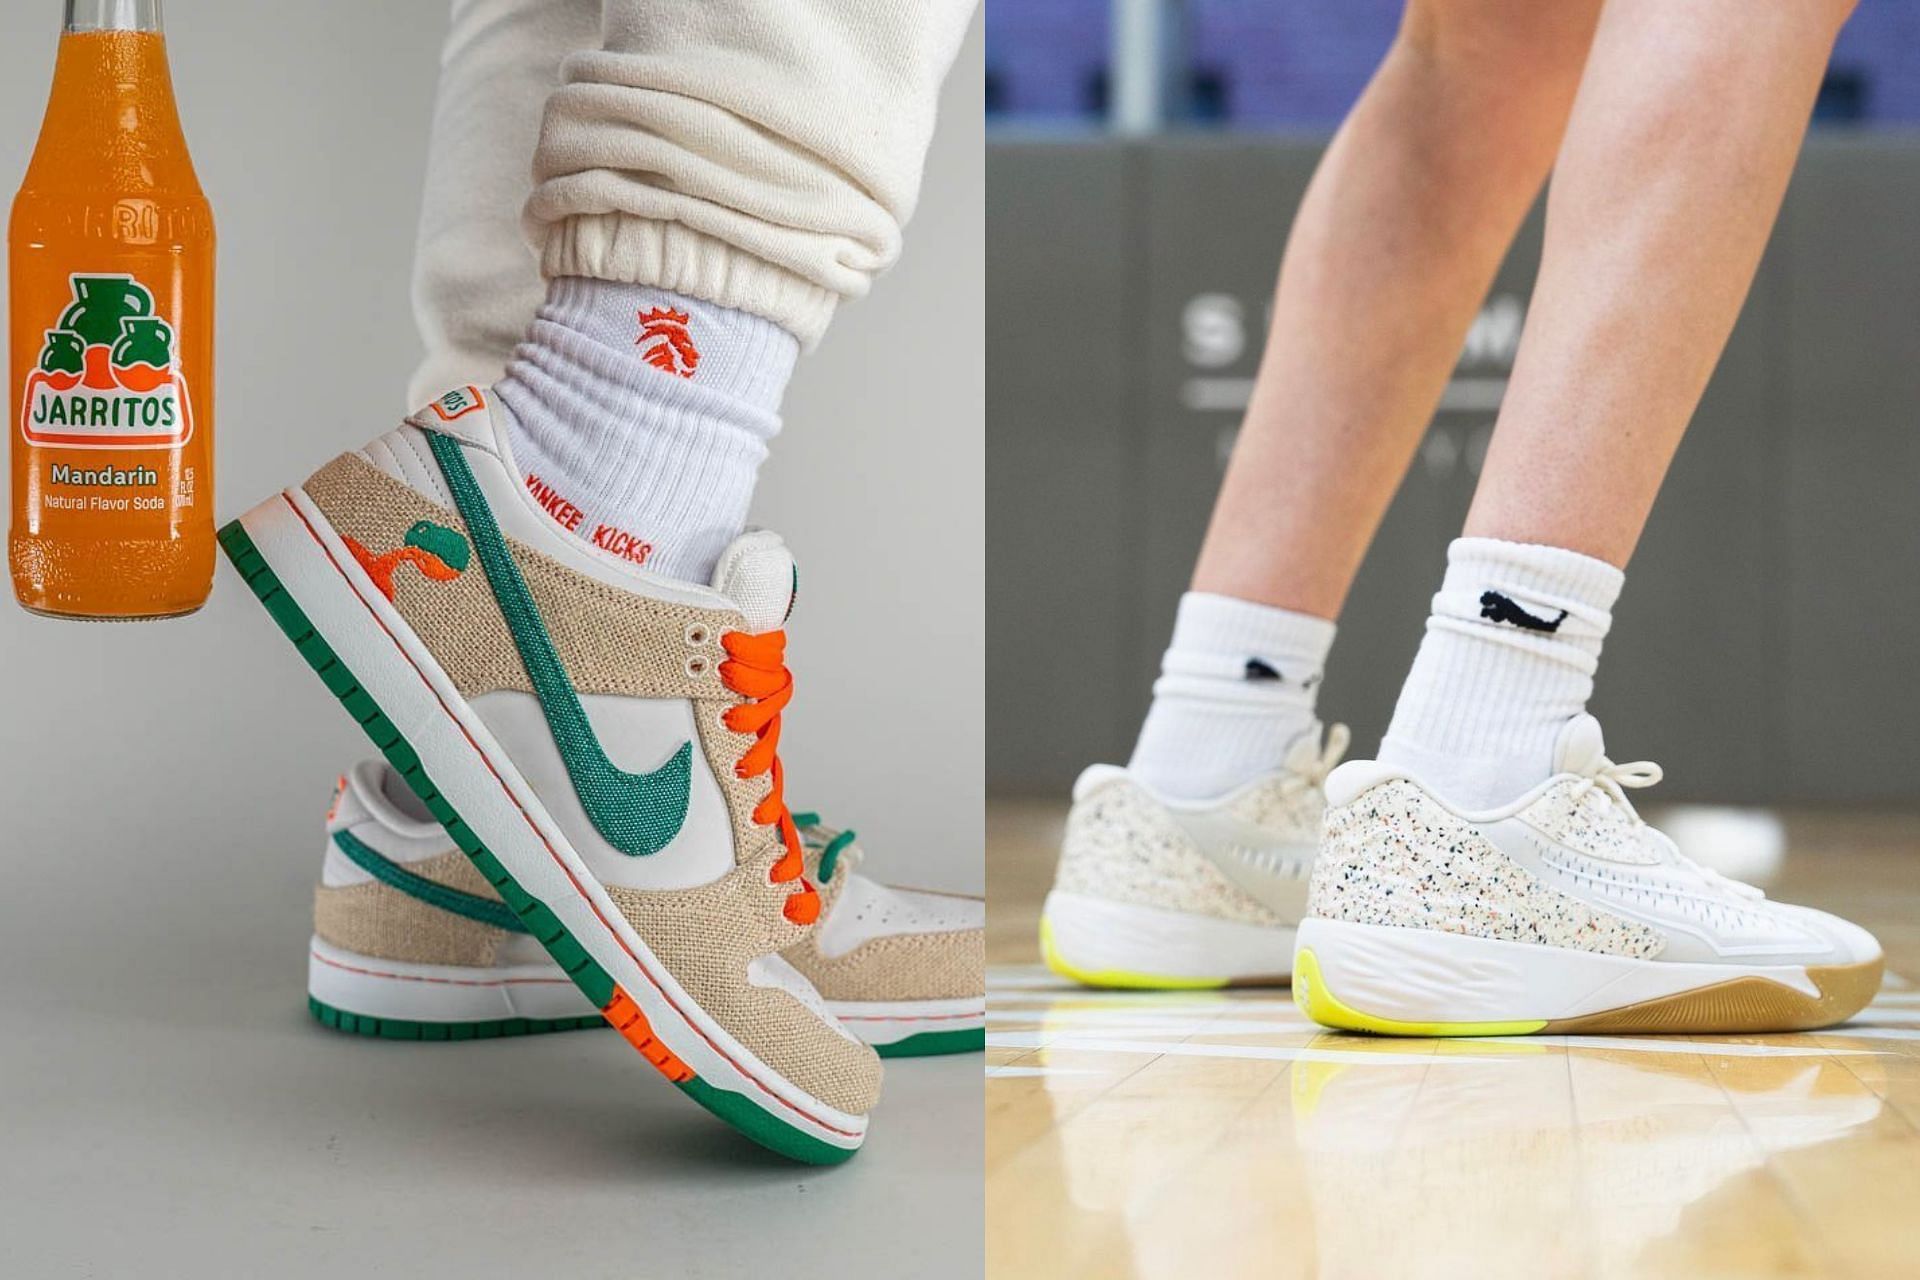 Nike: 5 popular sneaker collabs planned for 2023